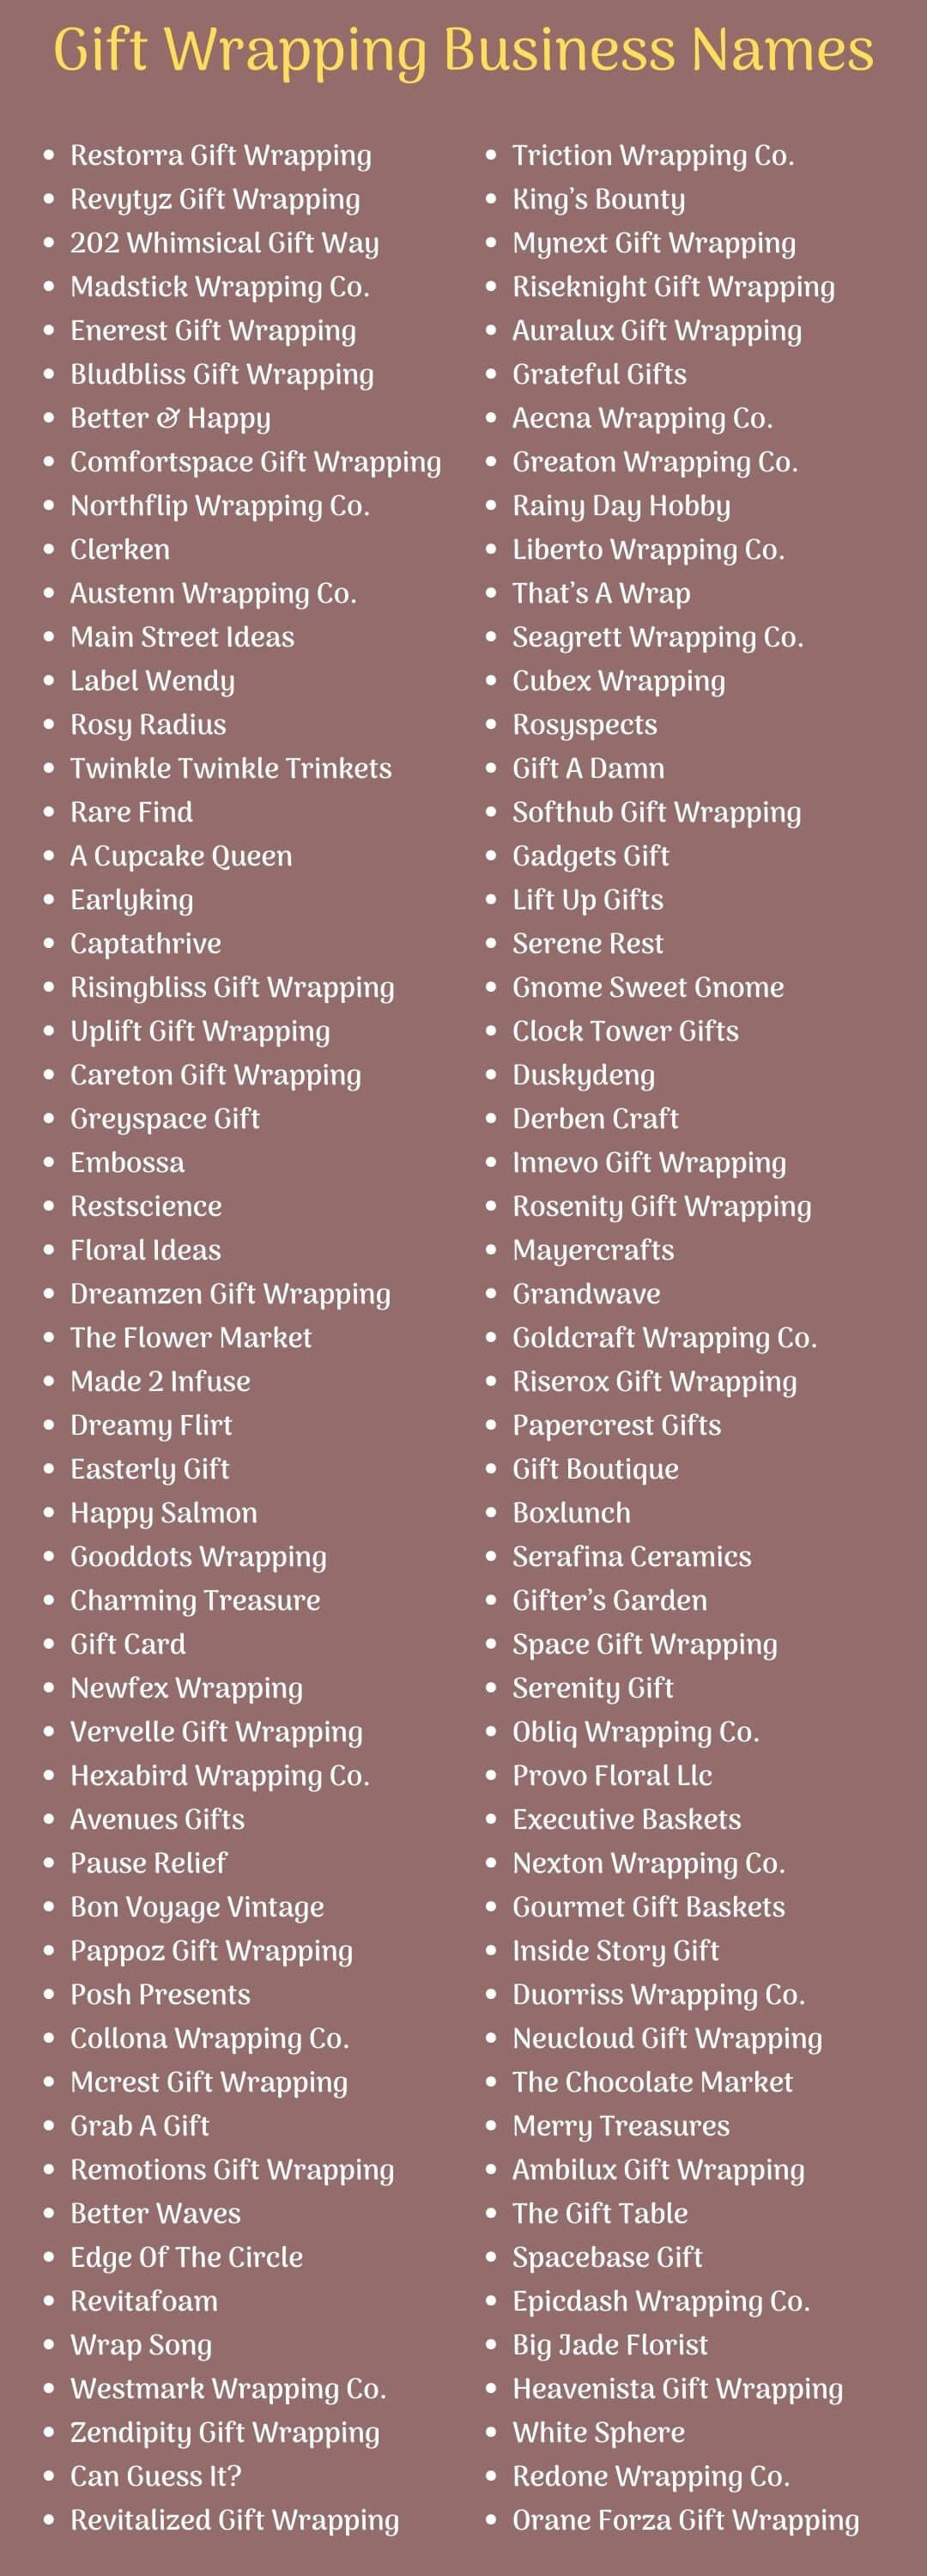 Gift Wrapping Business Names